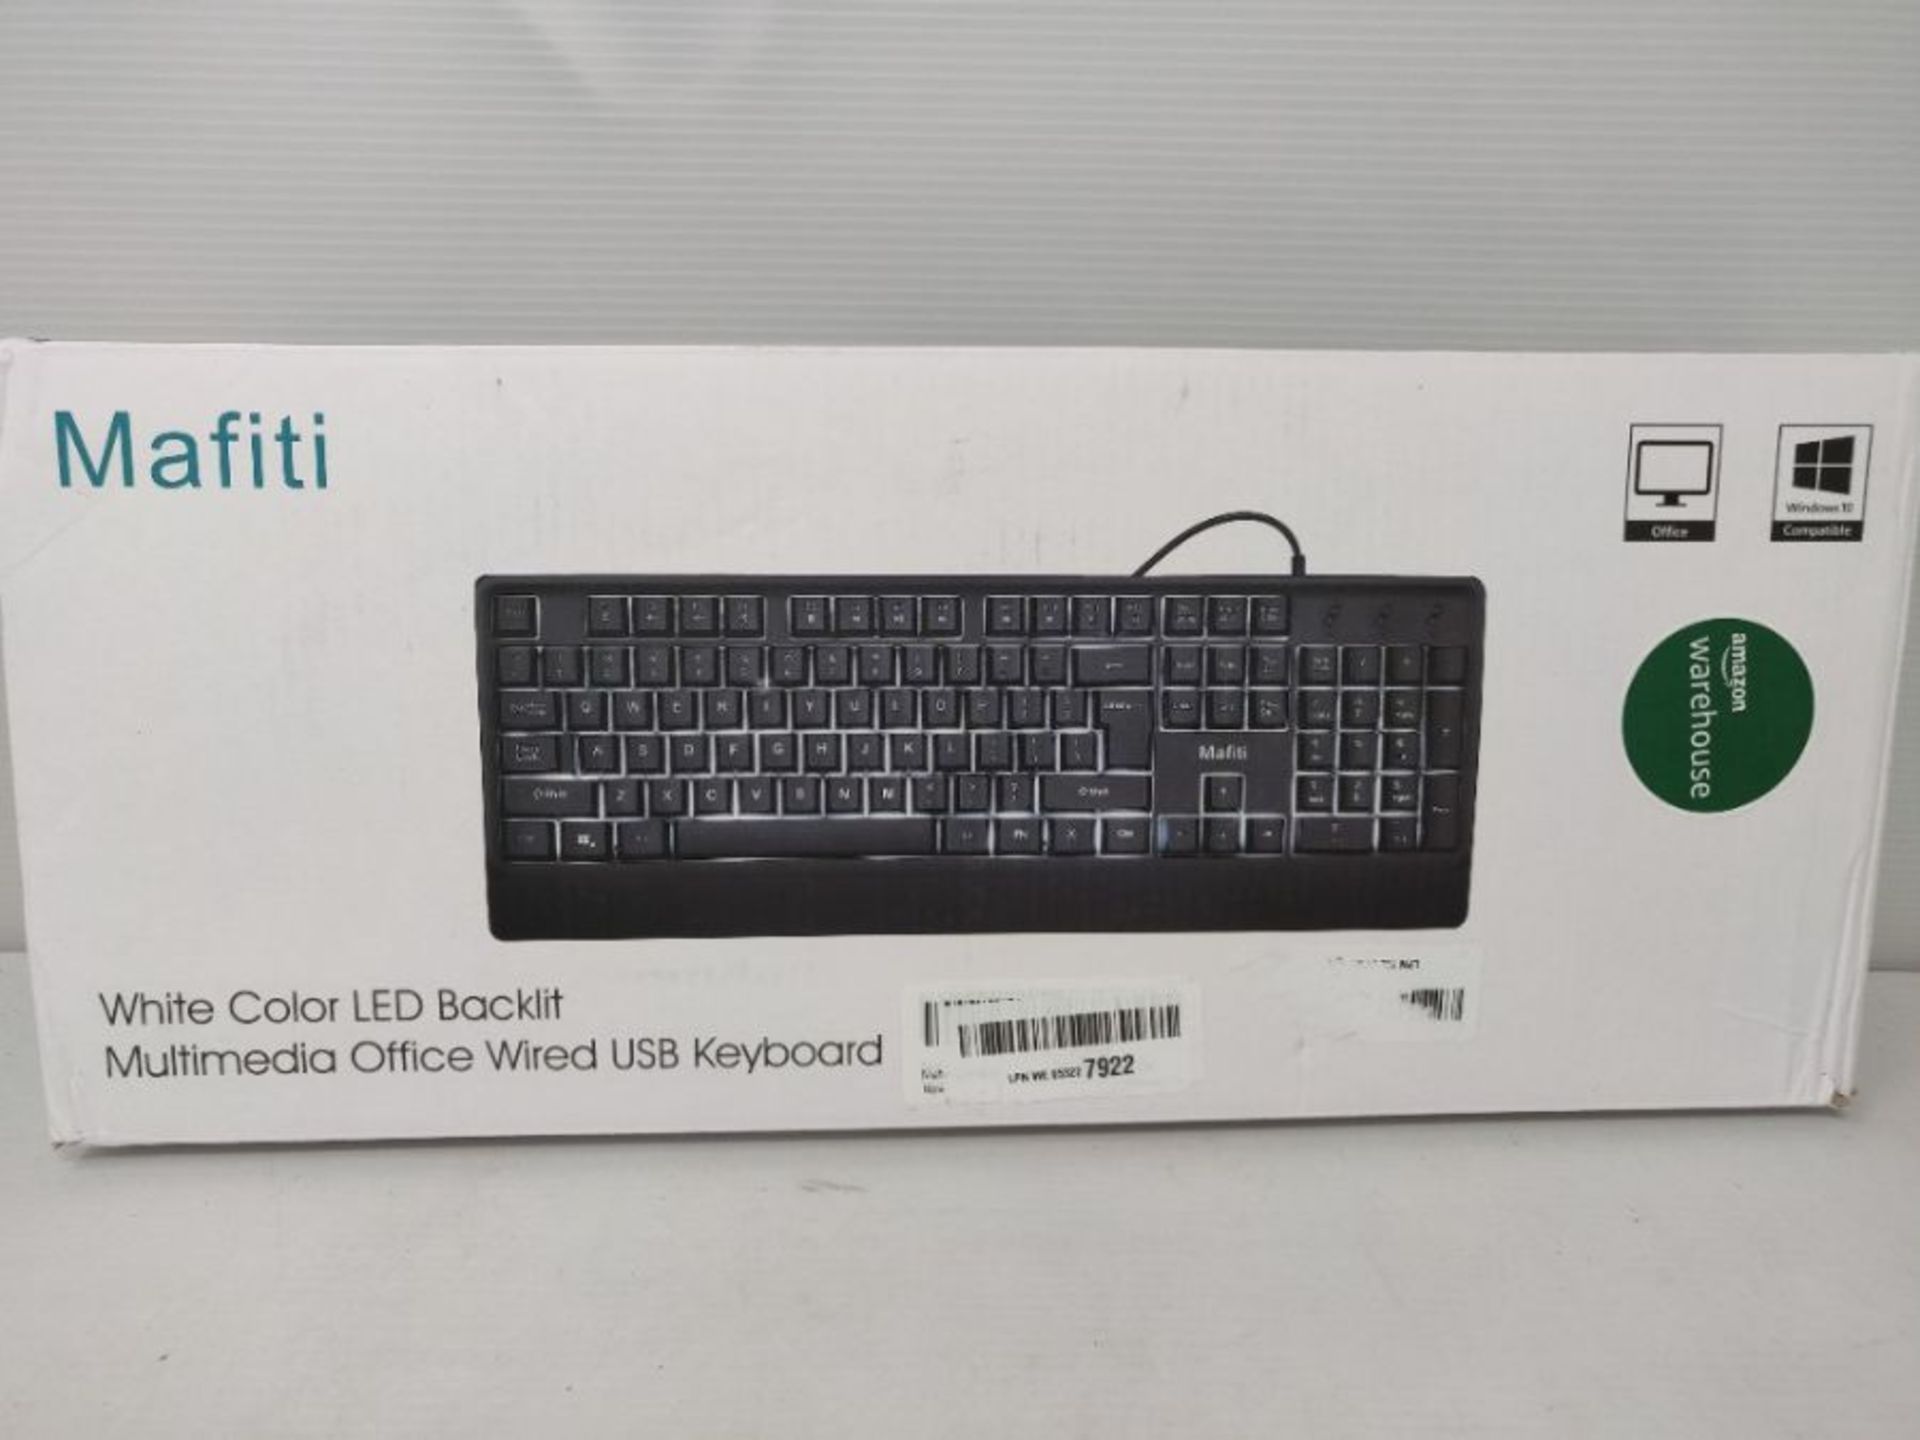 [INCOMPLETE] [CRACKED] mafiti Computer Office Keyboard Wired USB 104 Keys Full Size Wh - Image 2 of 3